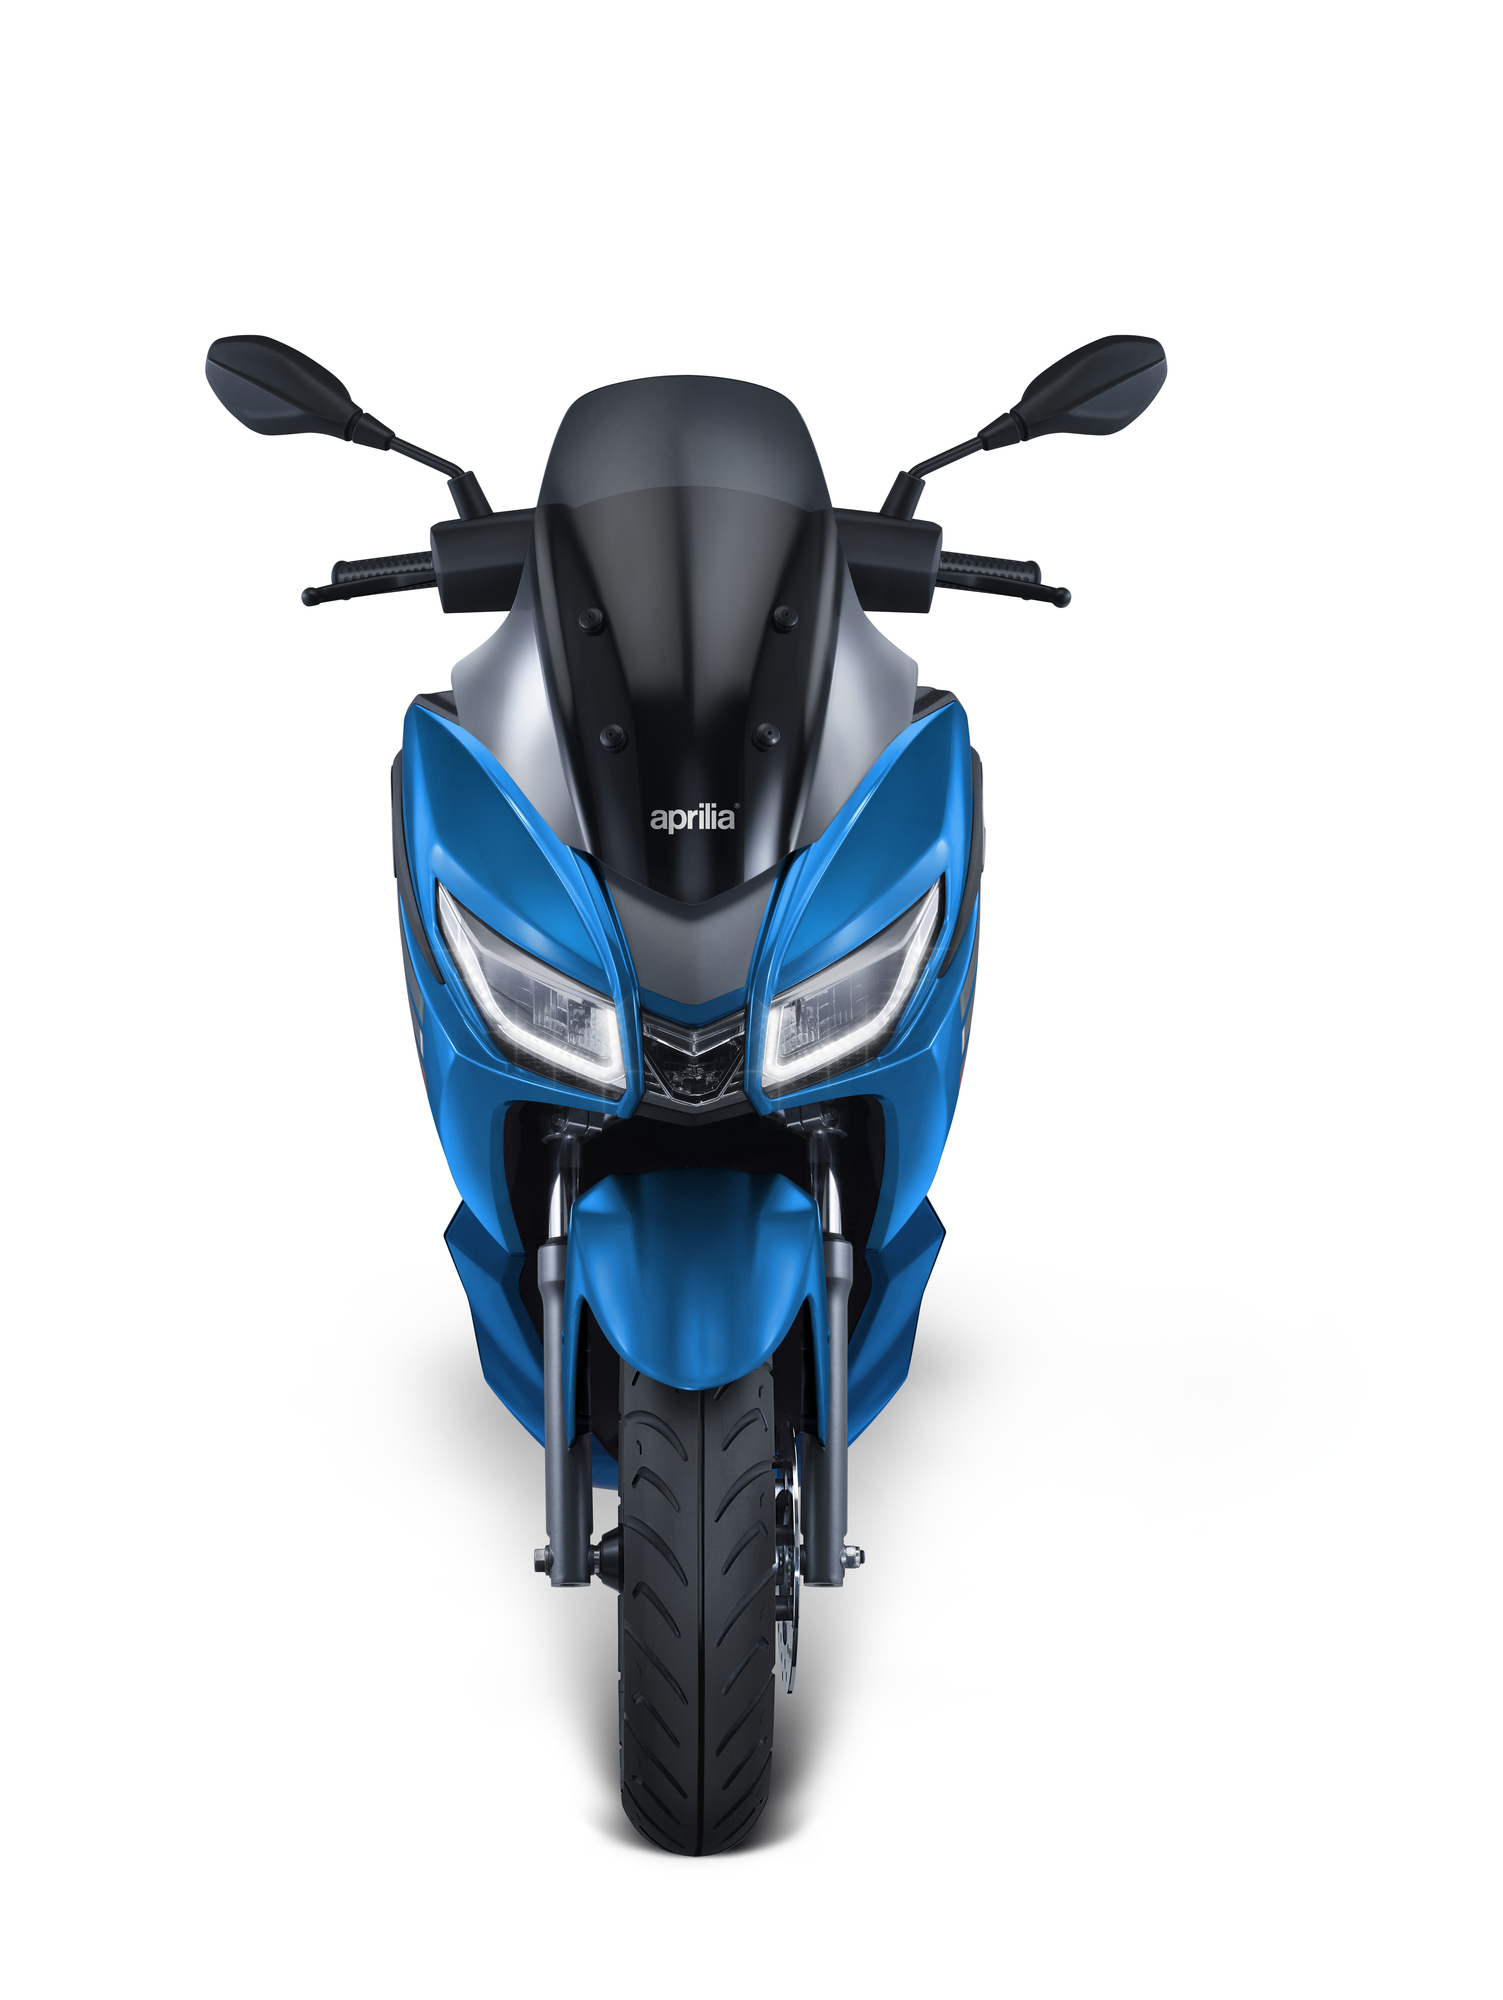 Piaggio India To Soon Commence The Production Of Its Much Awaited Premium Scooter The Aprilia Sxr 160 Sectors Manufacturing Today India